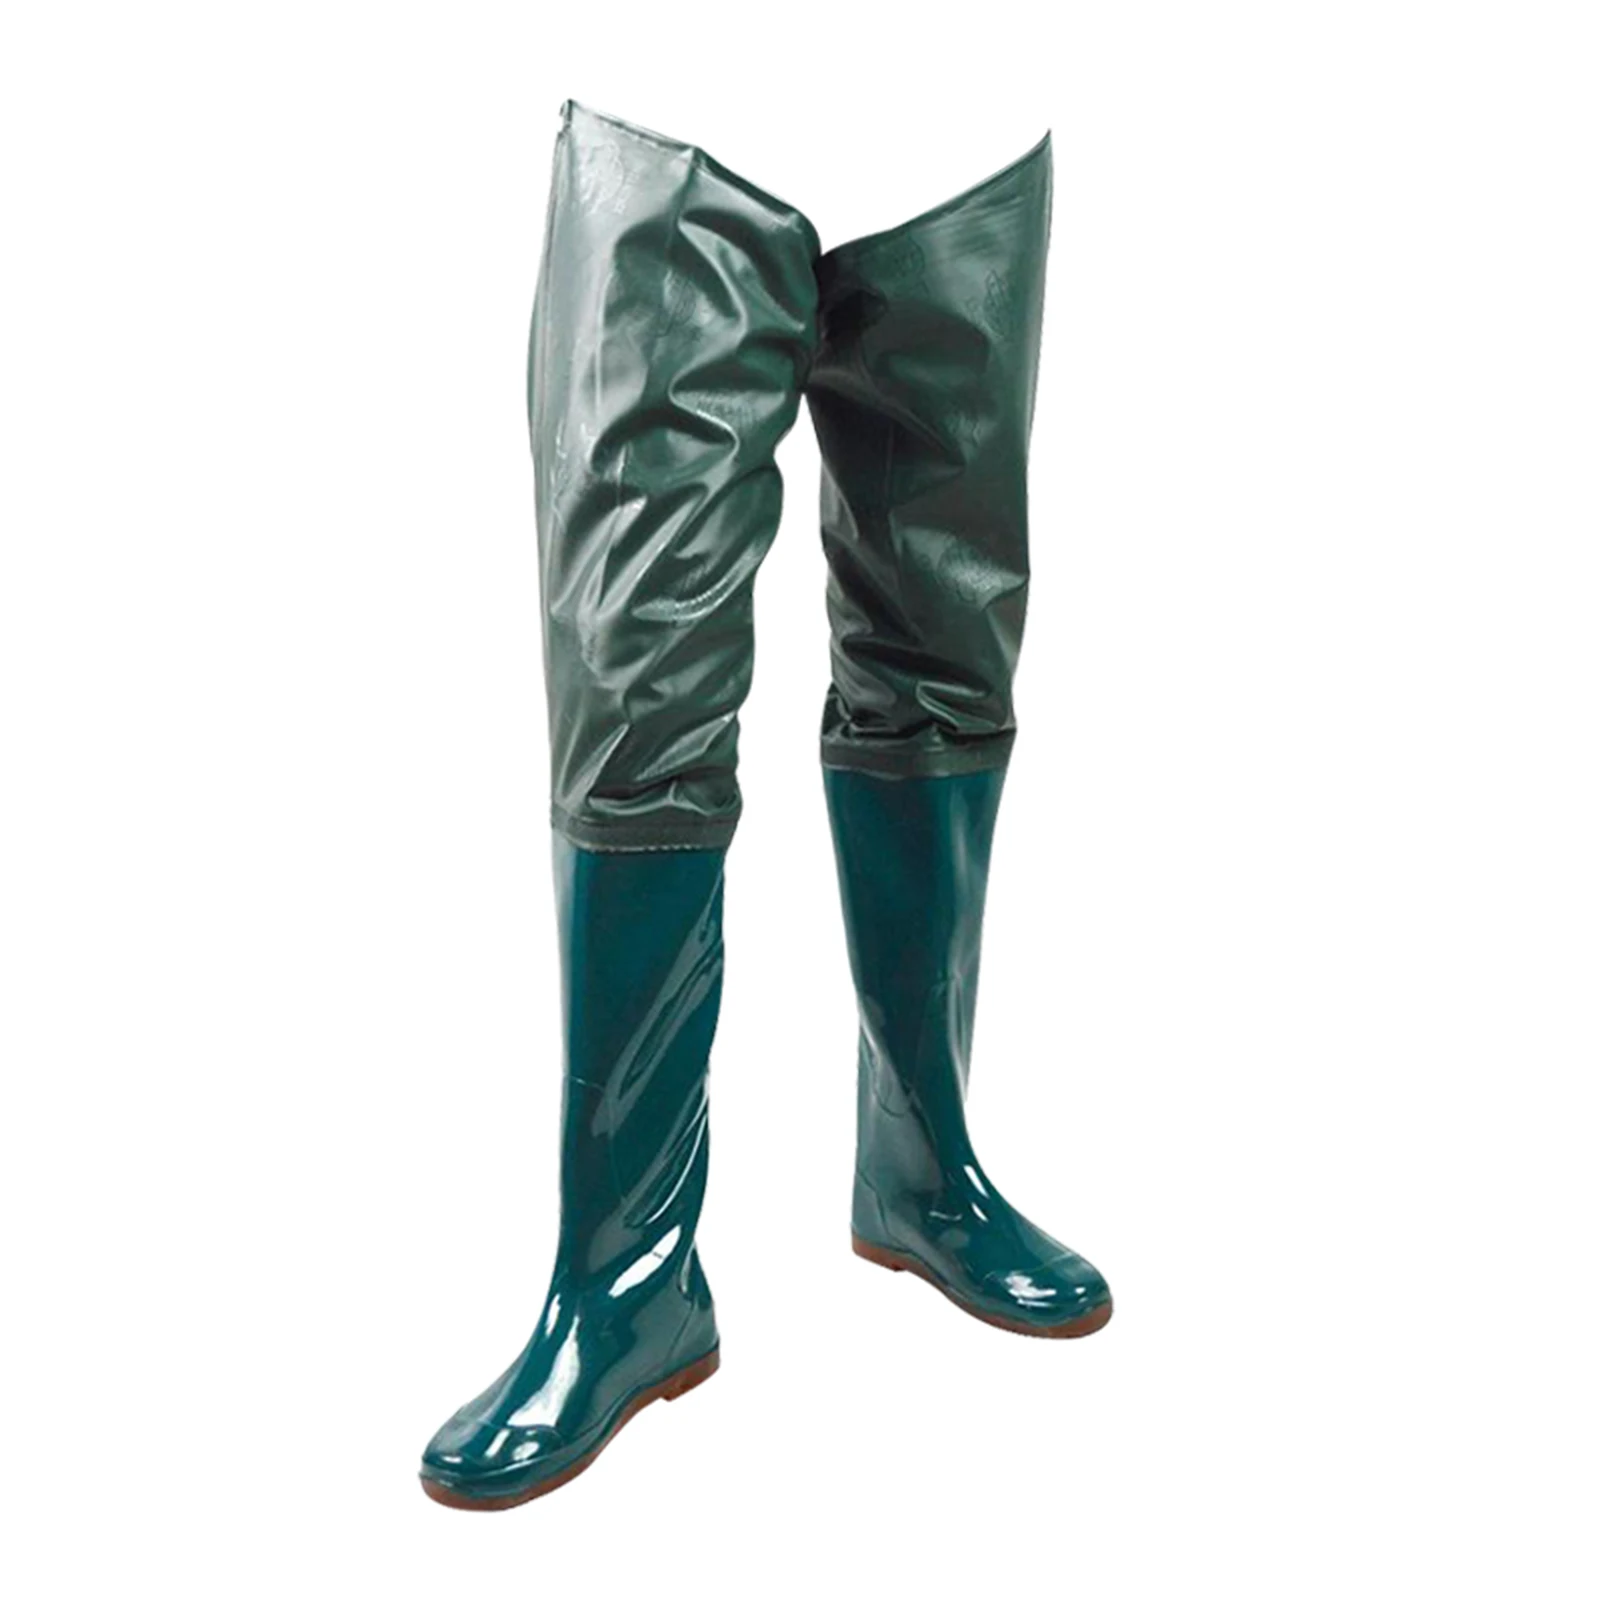 Fishing Hip Waders Underwater Boots Lightweight Waterproof Unisex PVC Nylon Fishing Water Pants Cleated Sole Wader Boots